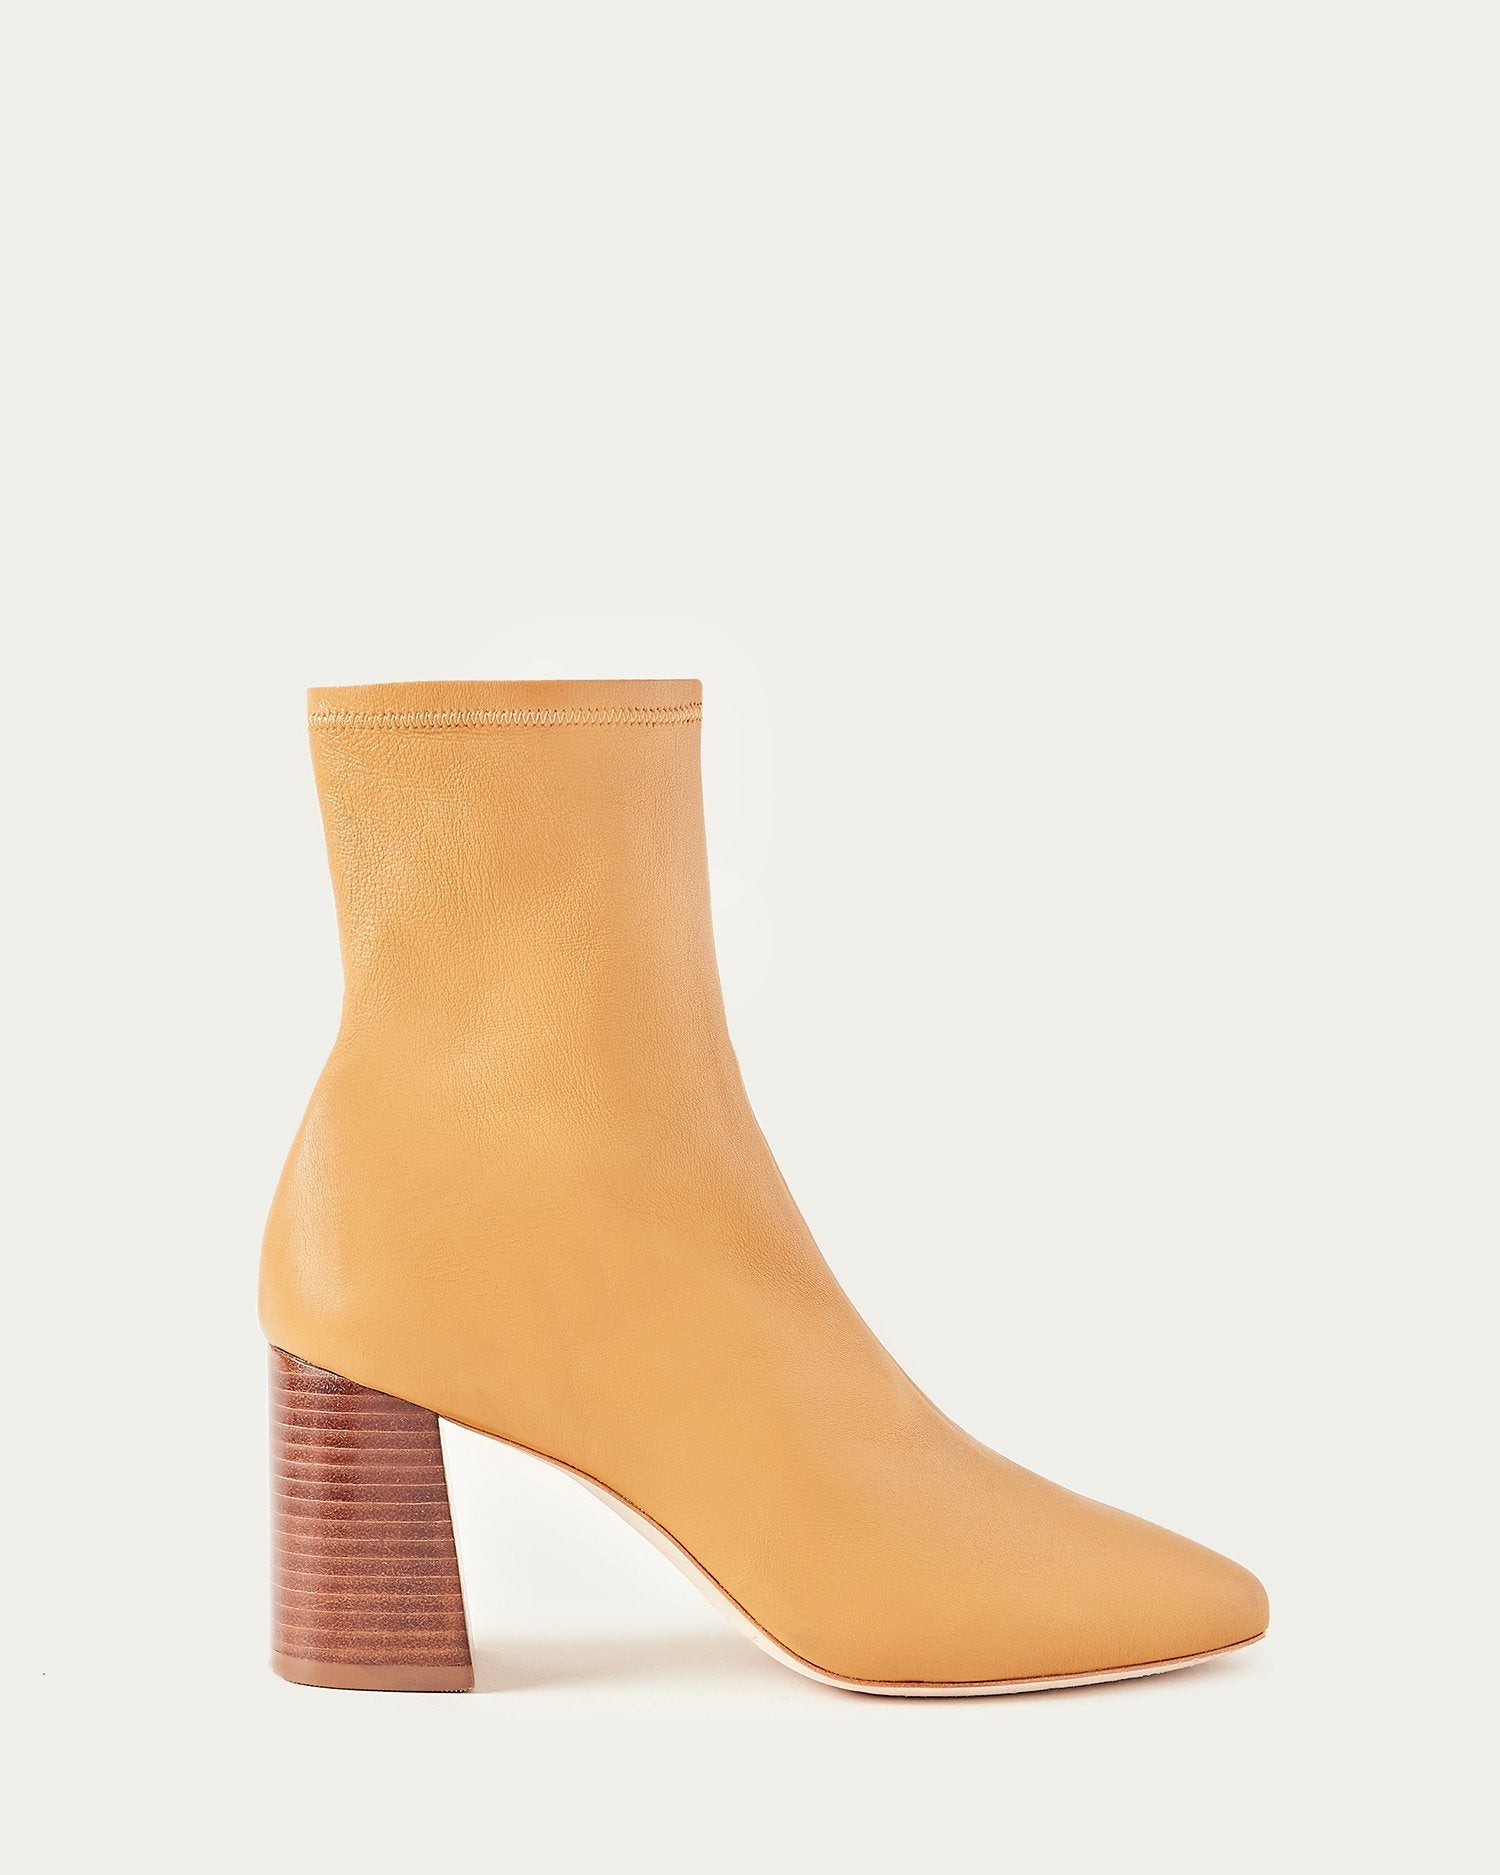 camel colored leather boots